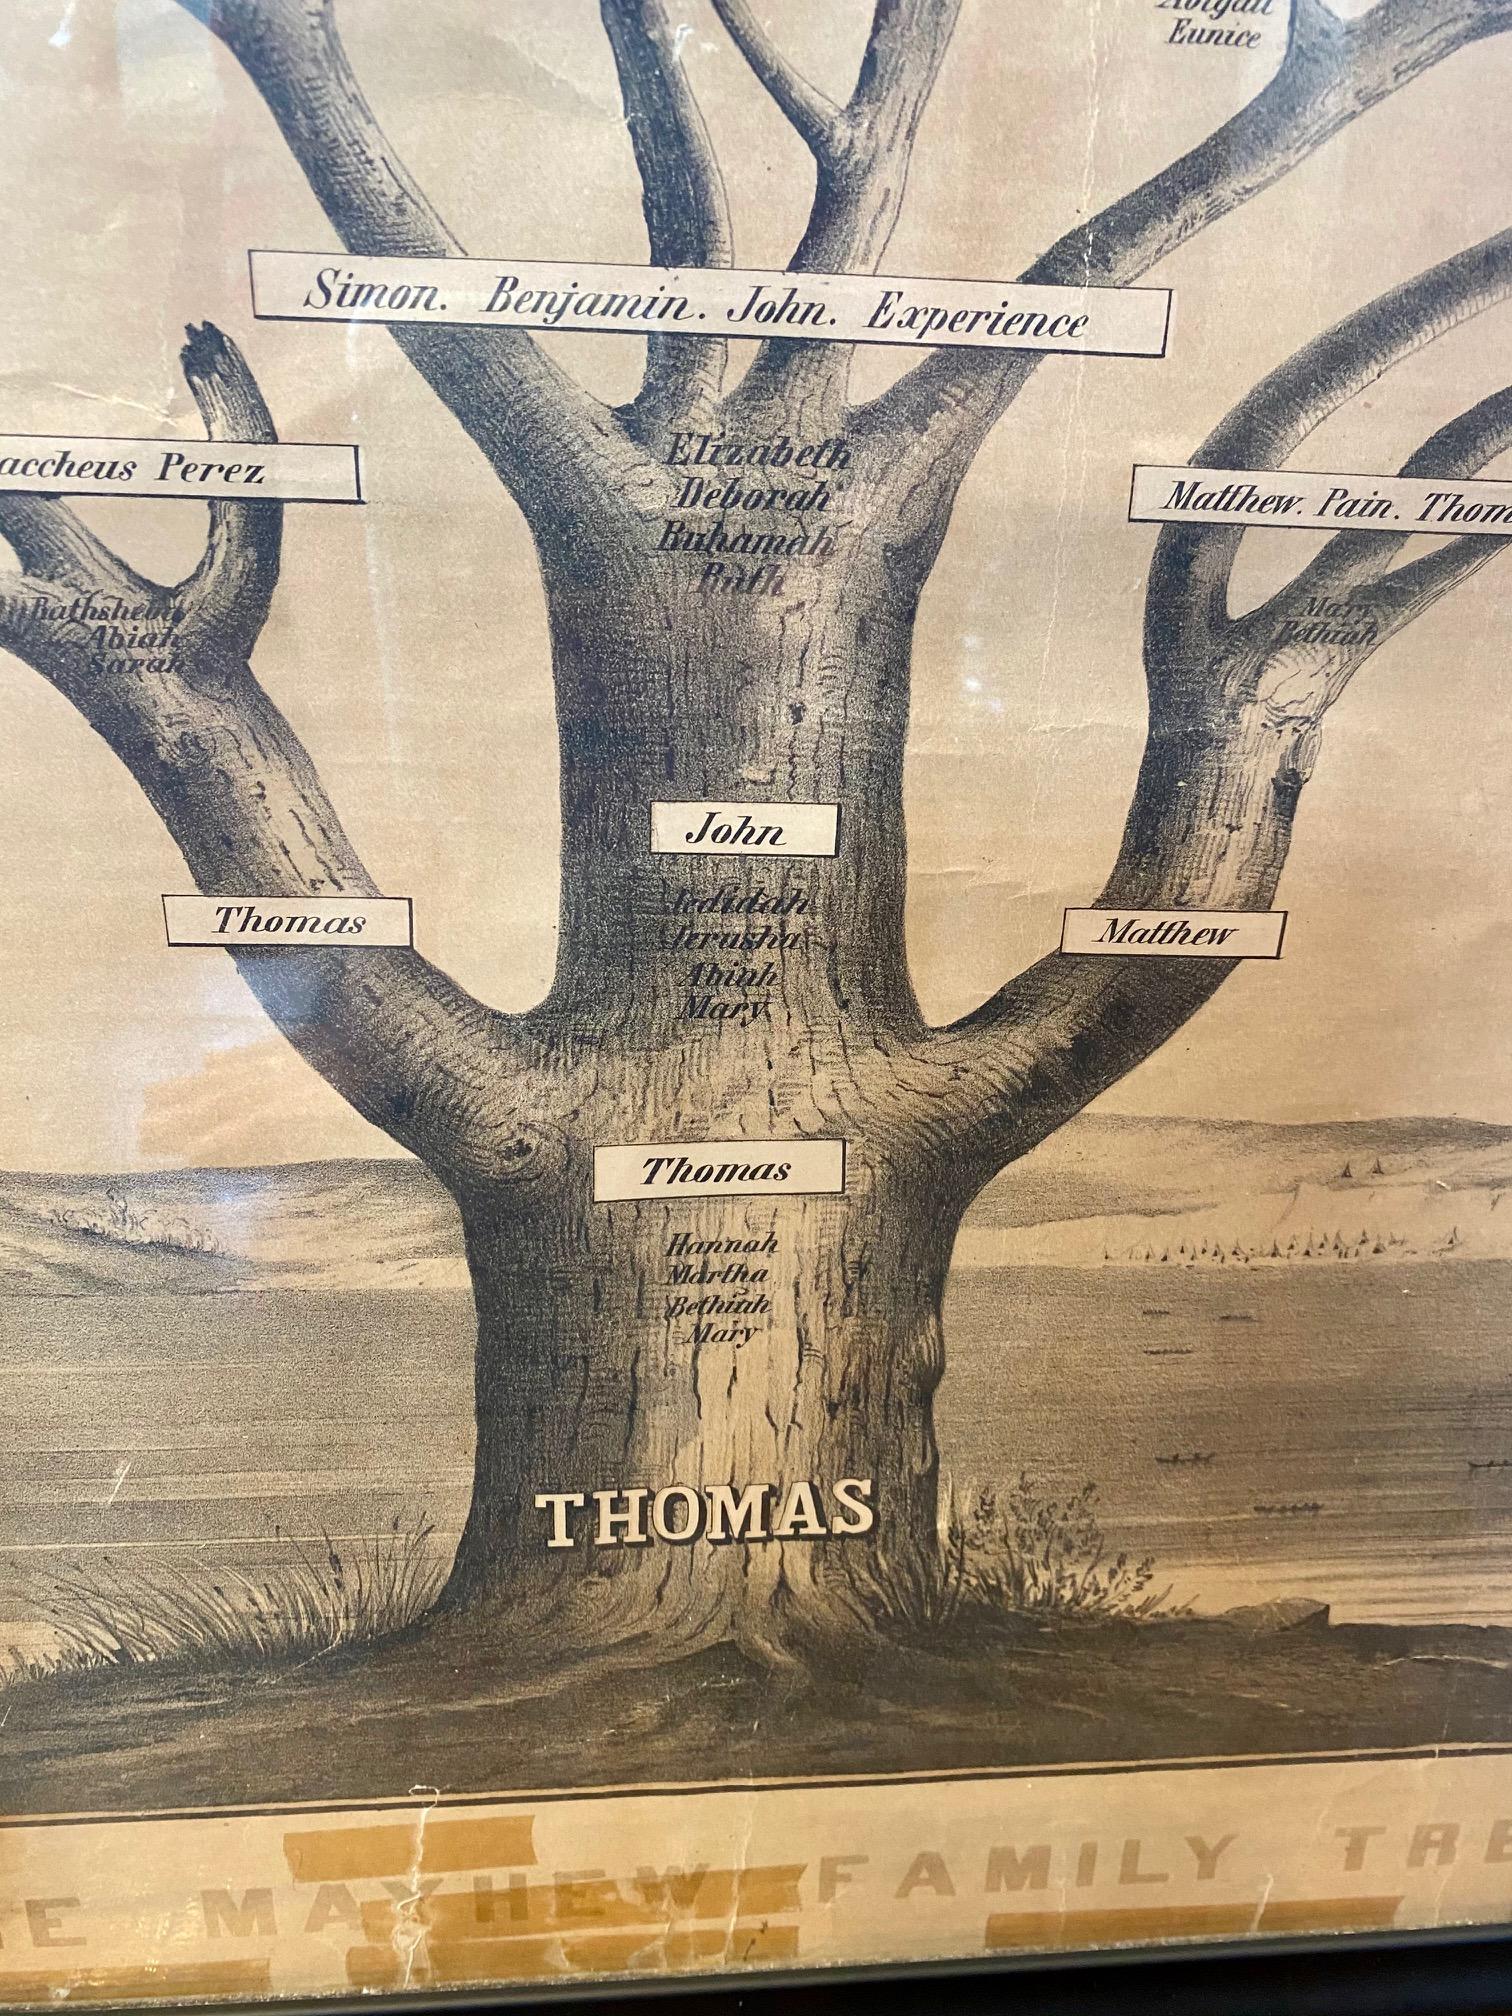 Very rare 19th century Mayhew Family tree from Nantucket and Martha's Vineyard, lithograph on paper laid on linen, printed in 1855, in form of literal tree above coastal landscape with dunes and rolling hills, settlements, ship and many canoes. The